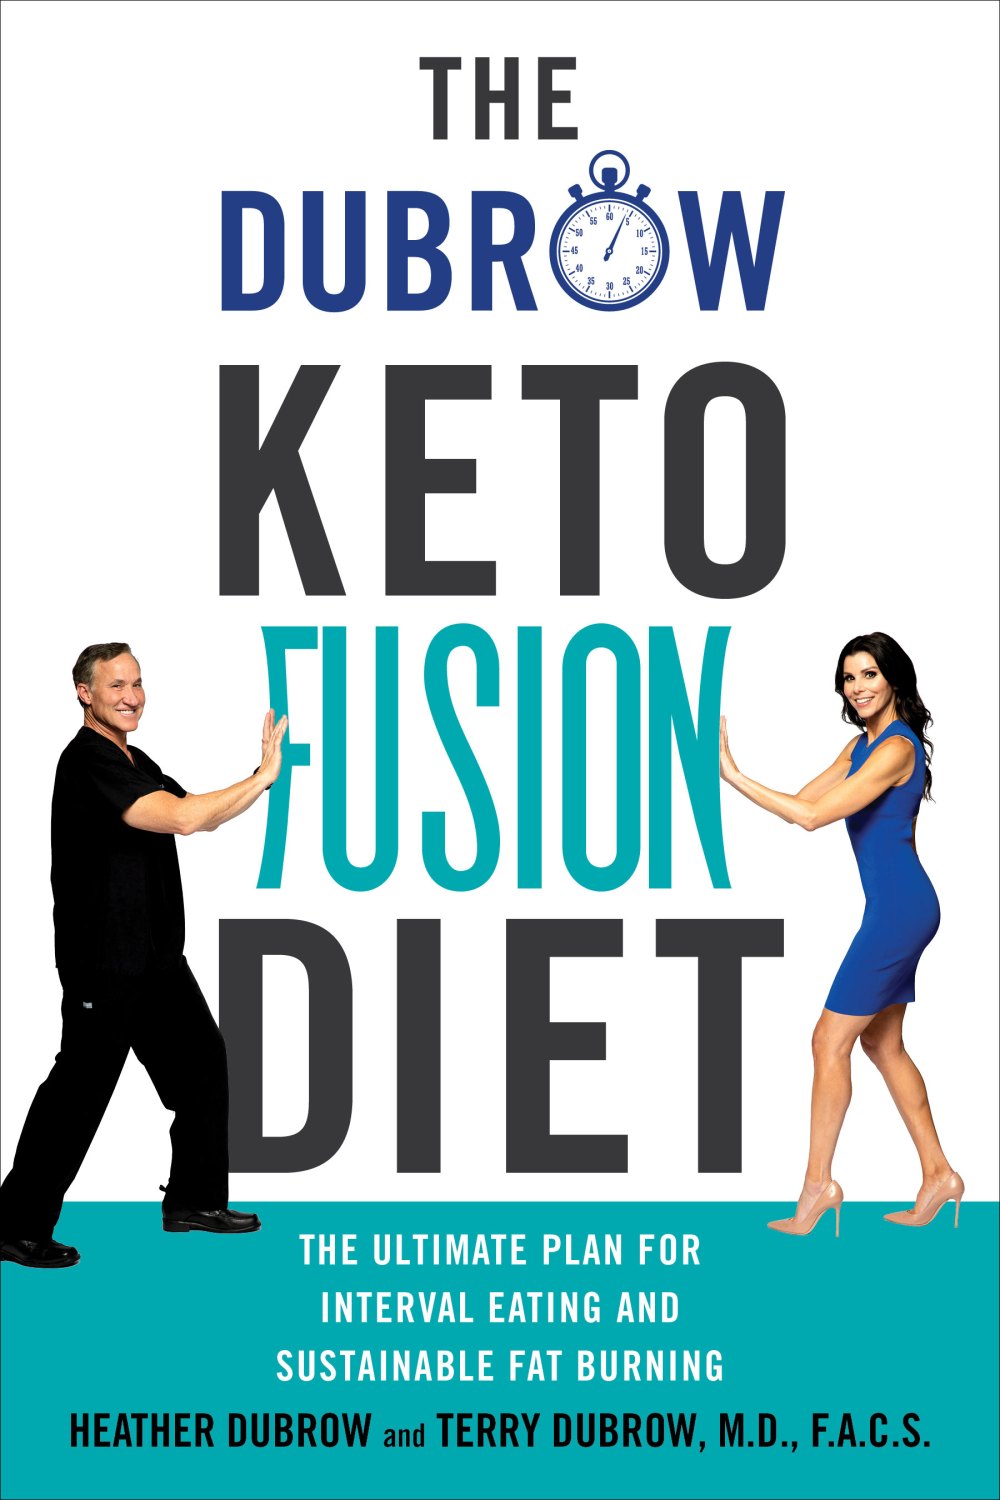 Heather Terry Dubrow New Diet Plan Has Some Serious Perks